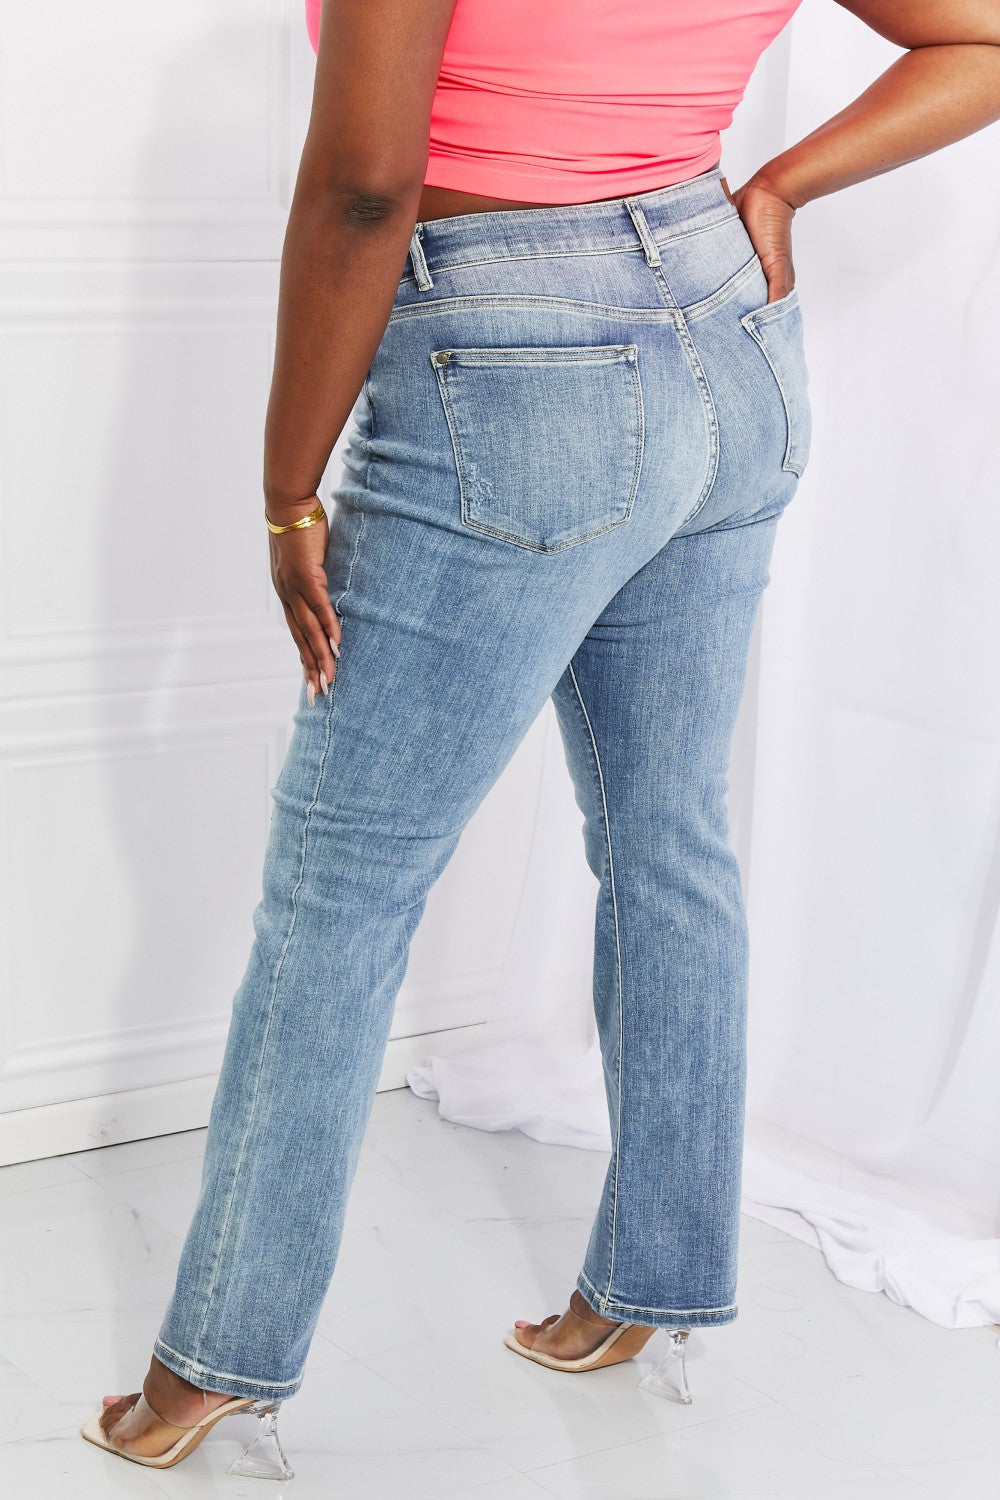 Back View, Plus Size, Judy Blue, Mid-Rise Bootcut Jeans Style 82337